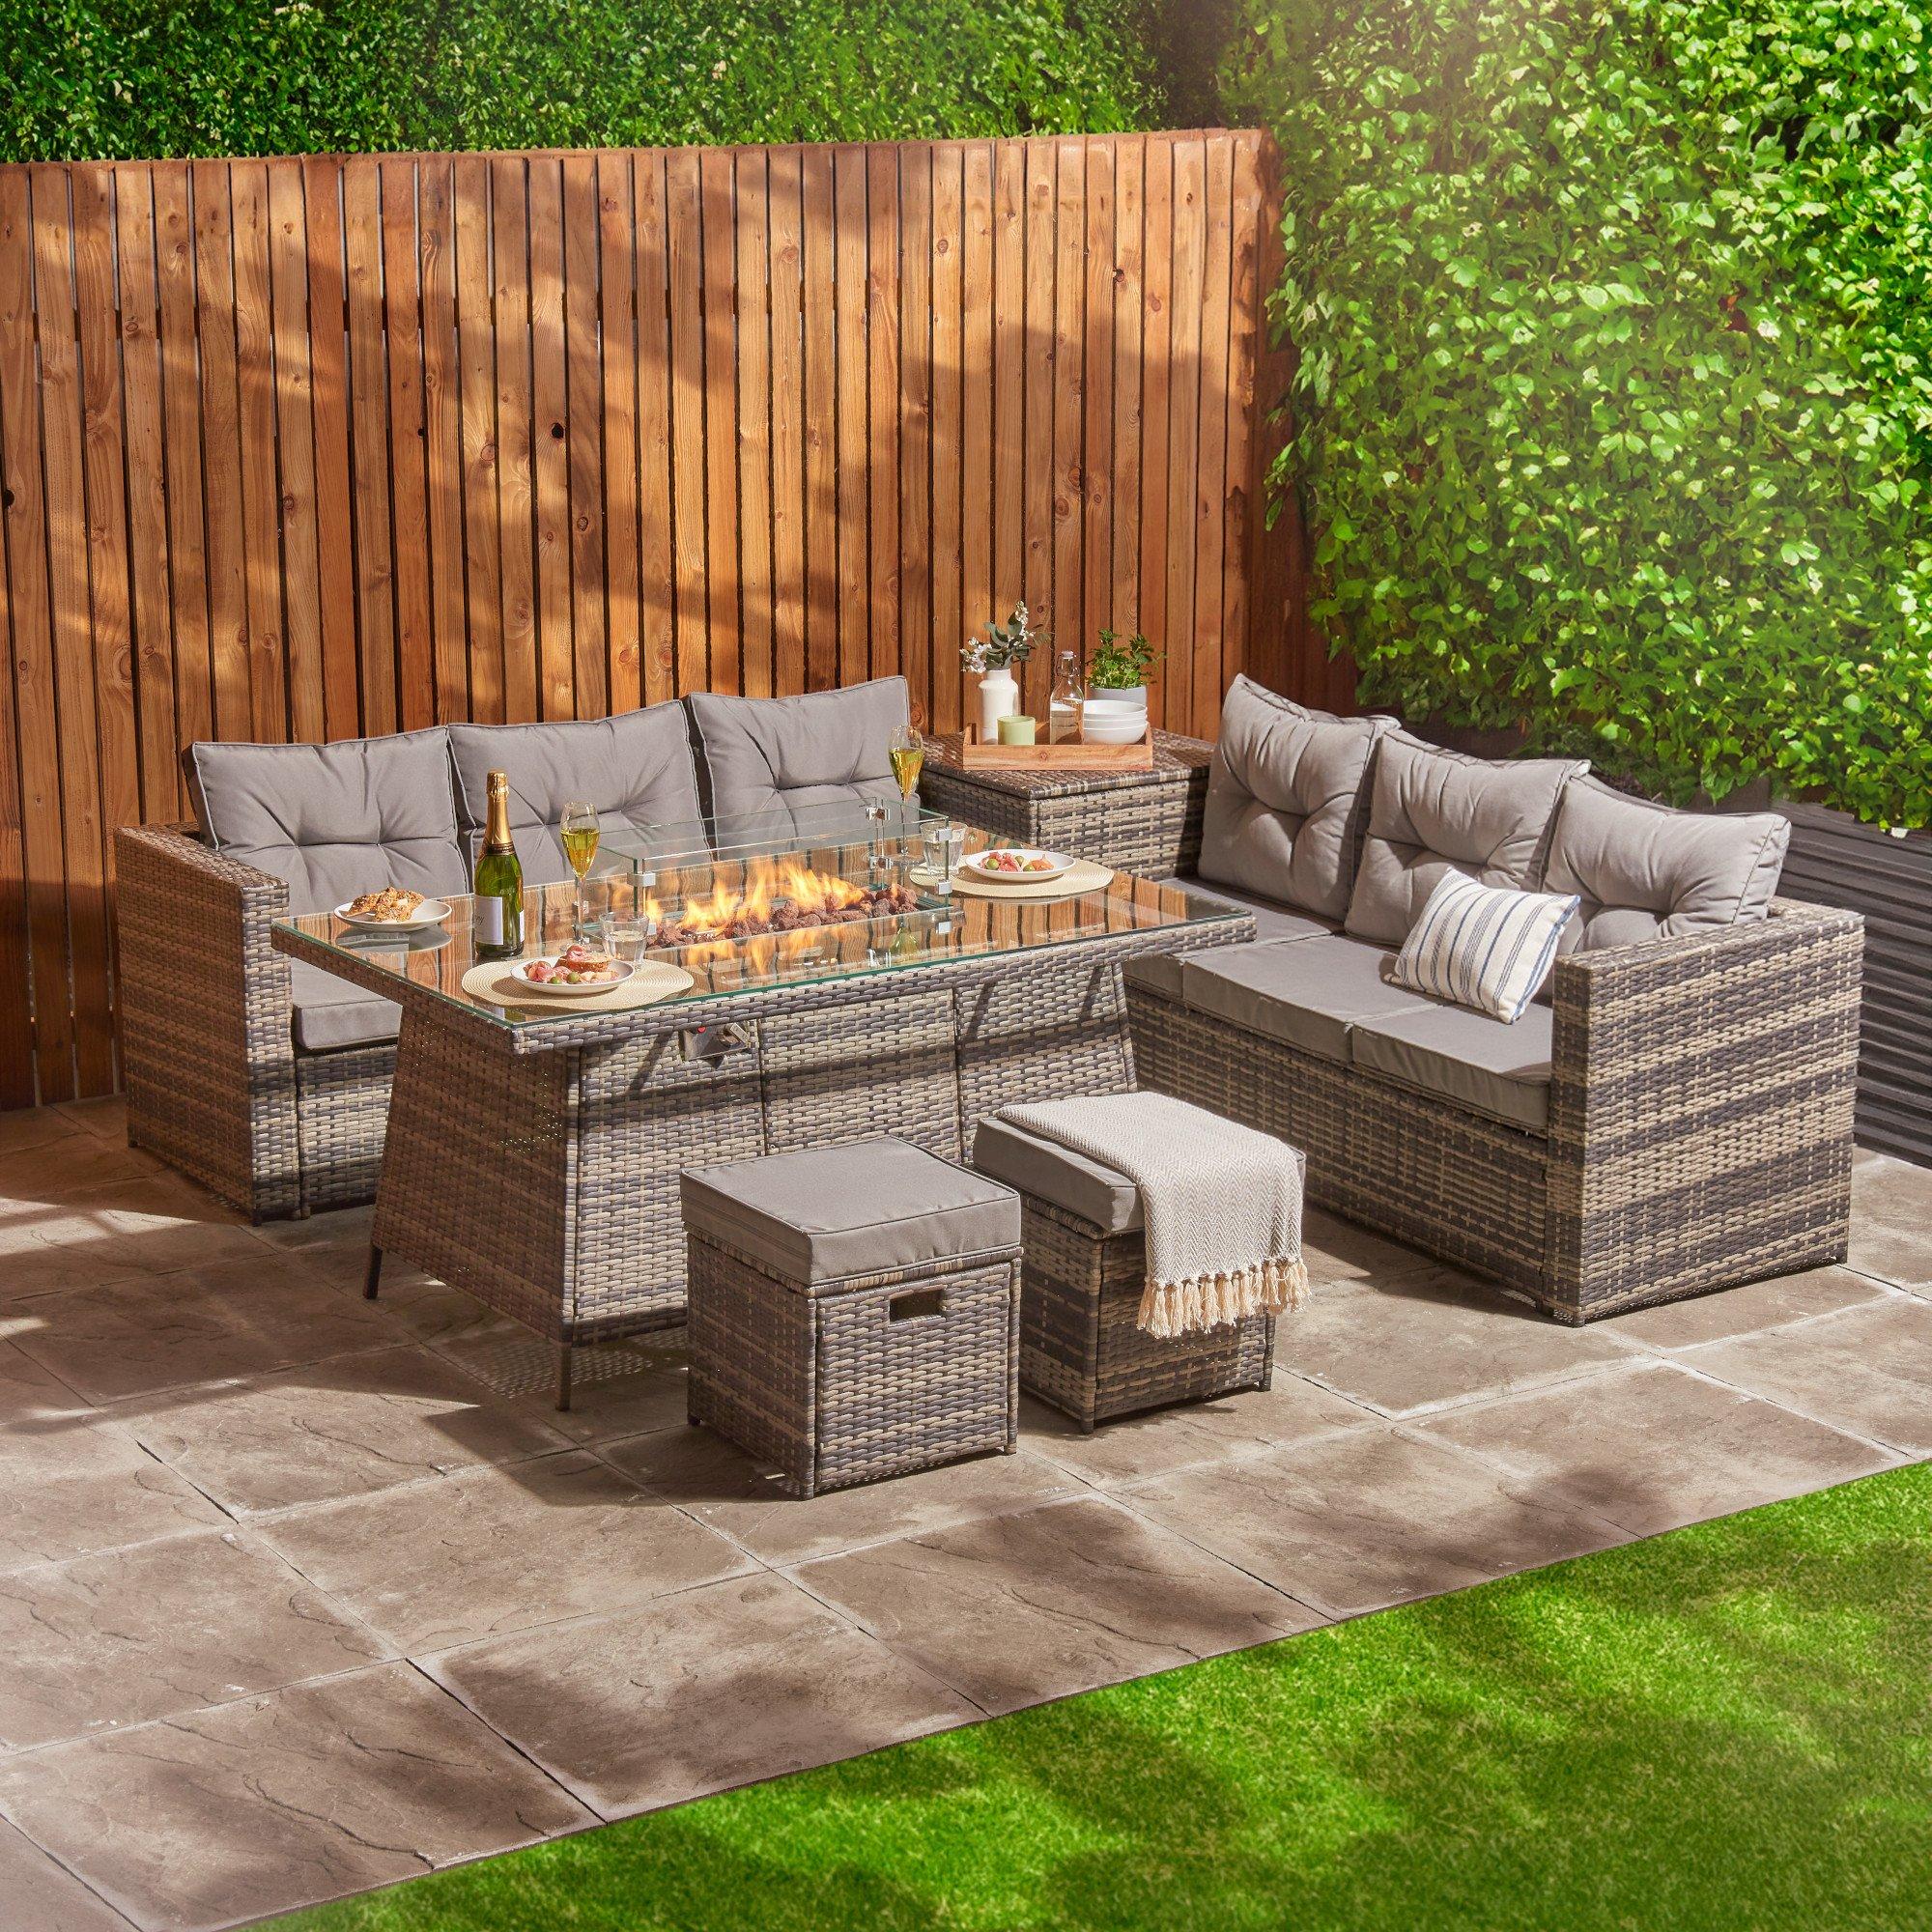 Rattan Garden Furniture With Fire Pit Table Corner Sofa Stools Patio Set